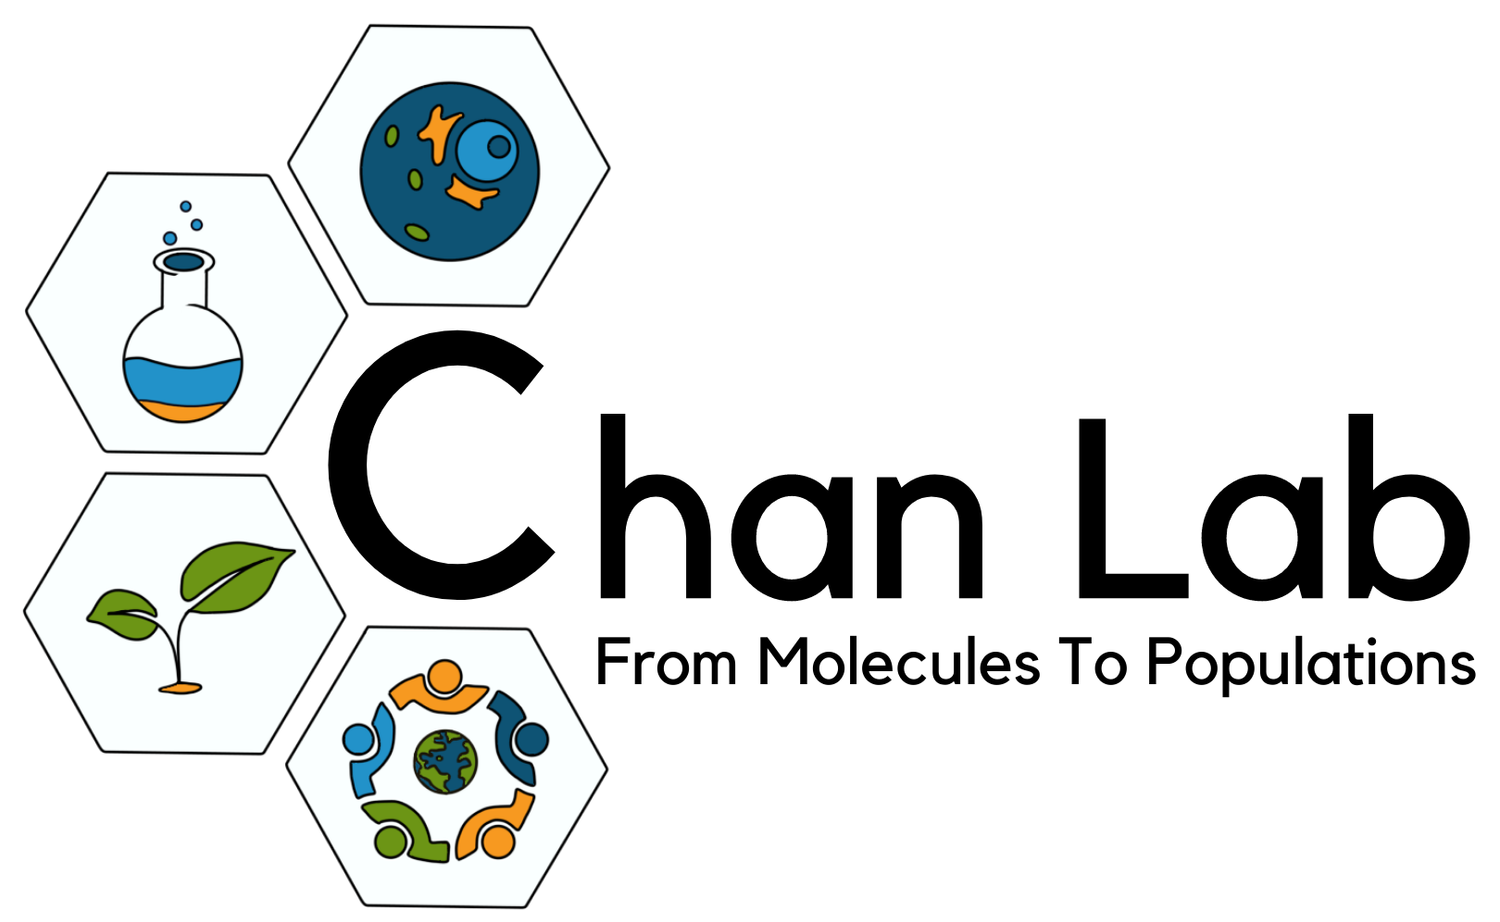 Chan Toxicology Lab